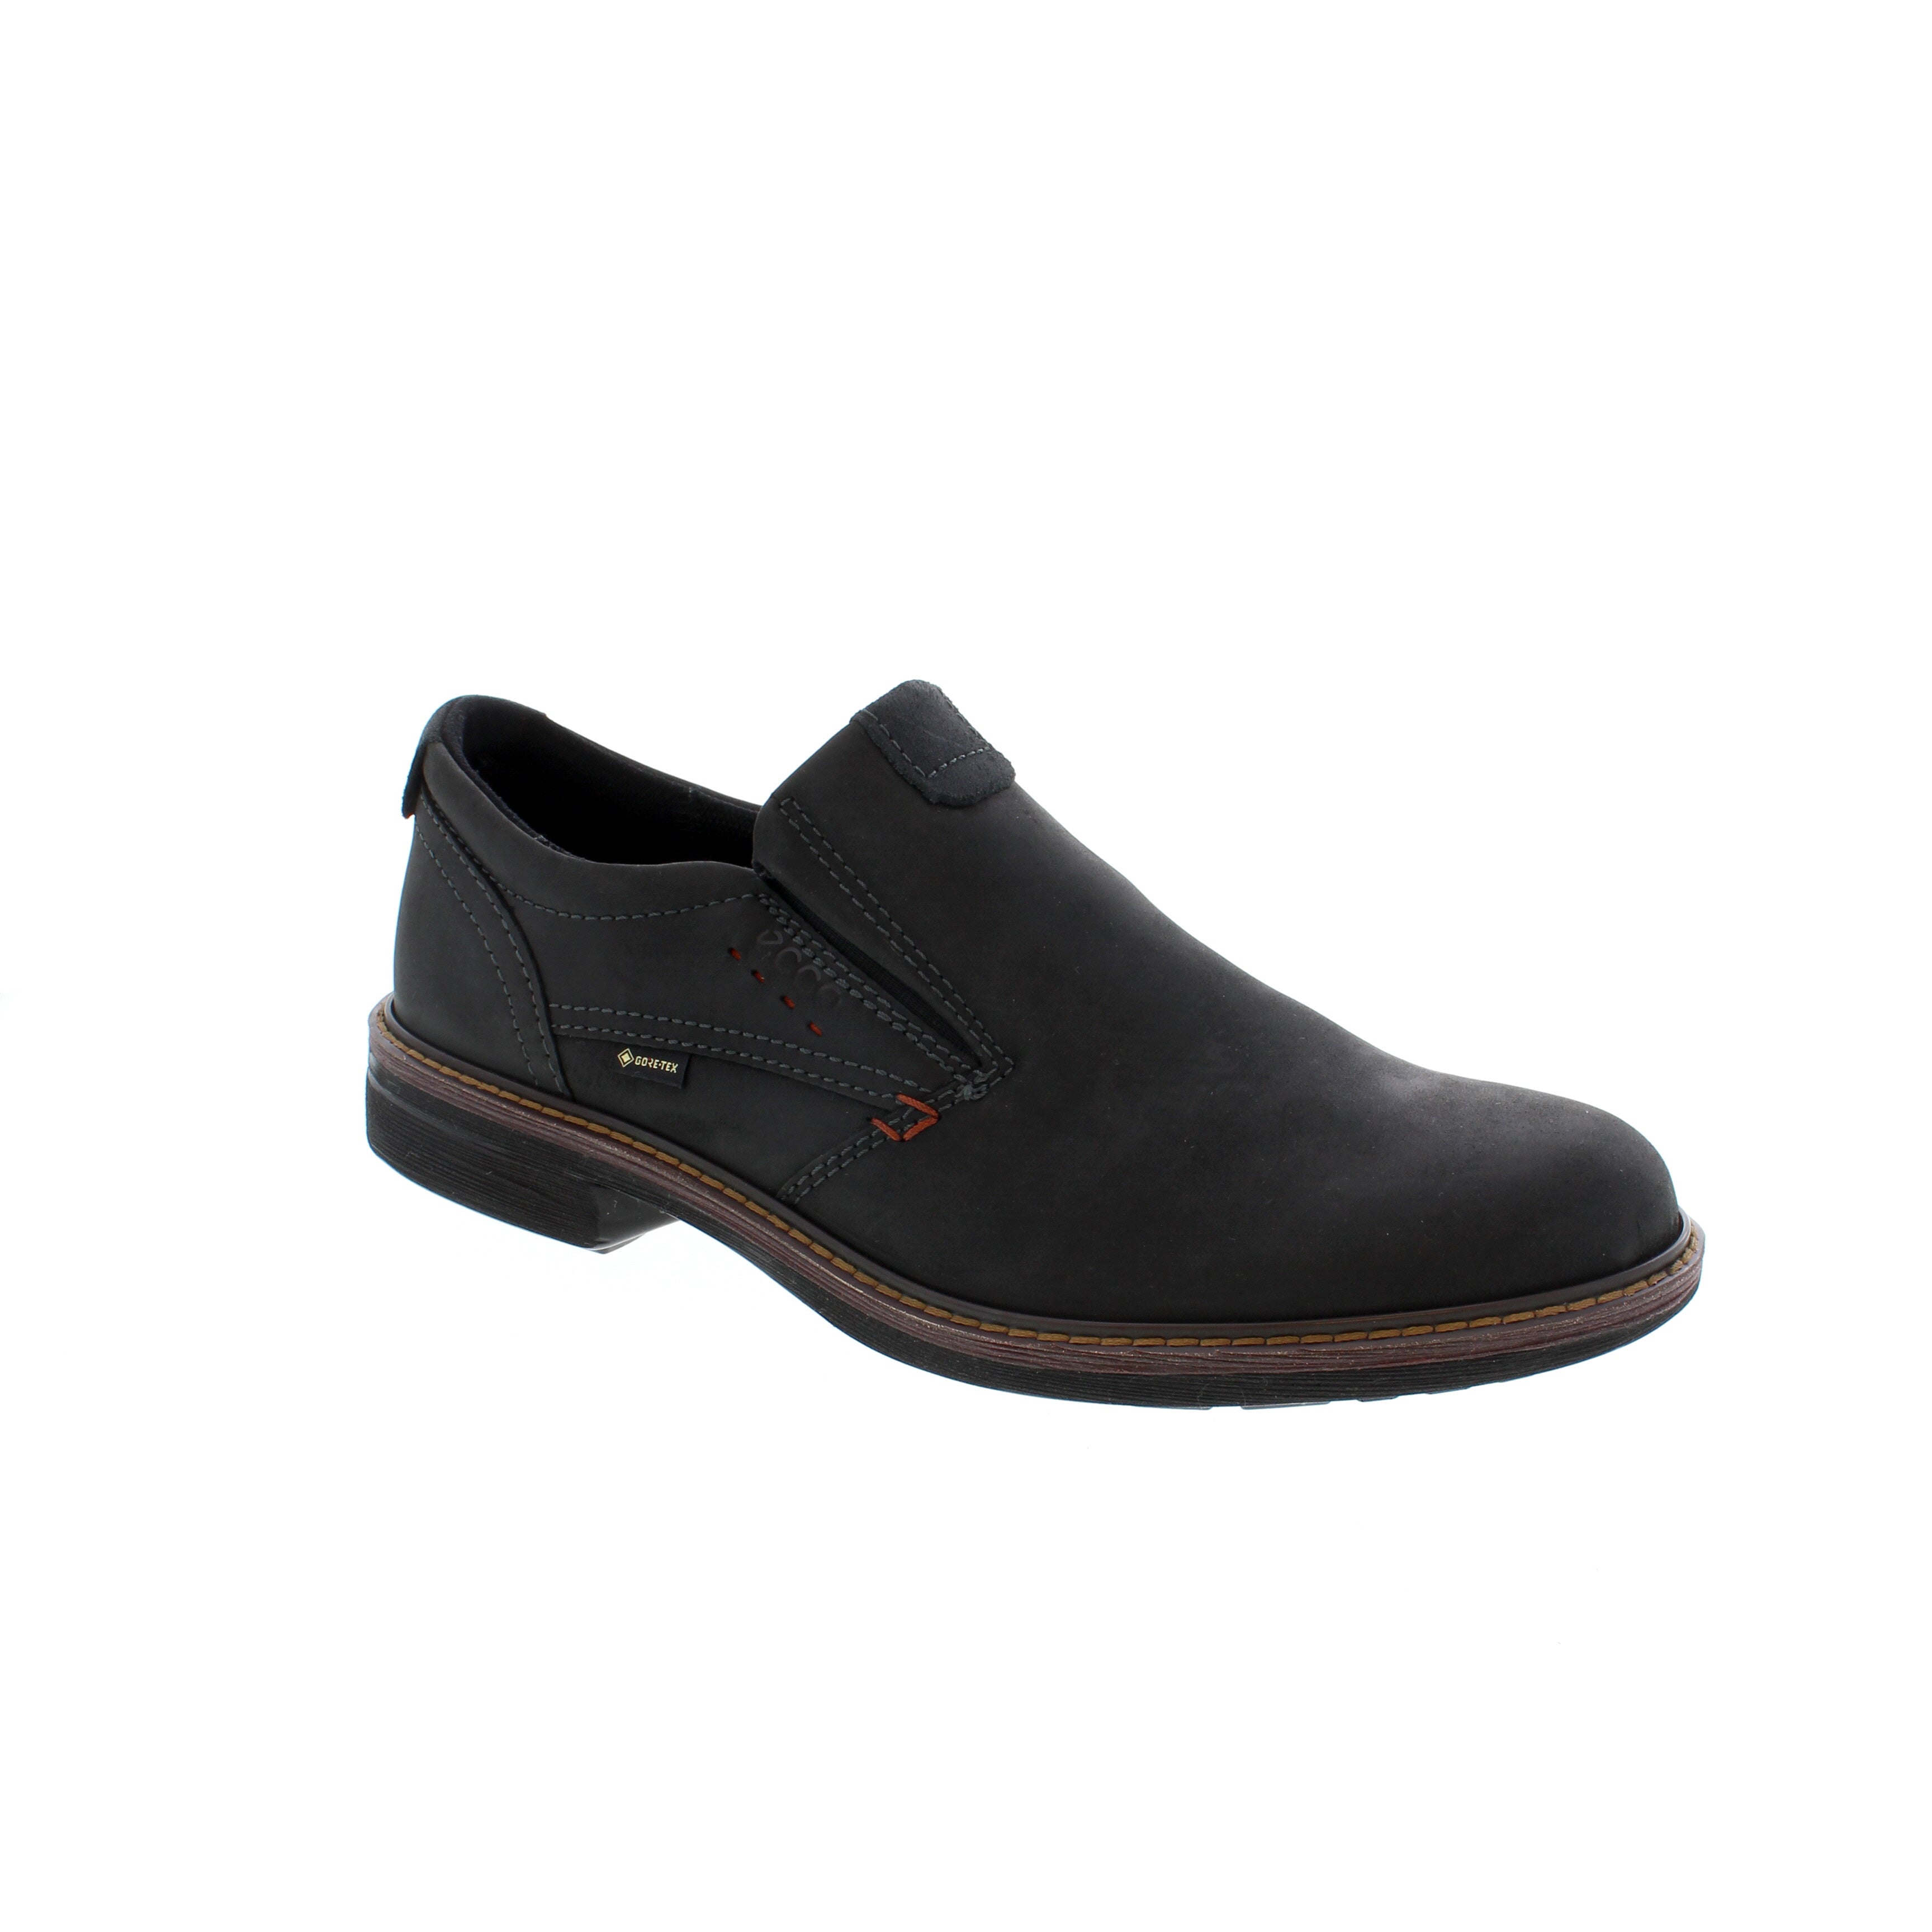 Turn 510184 | – City Shoes